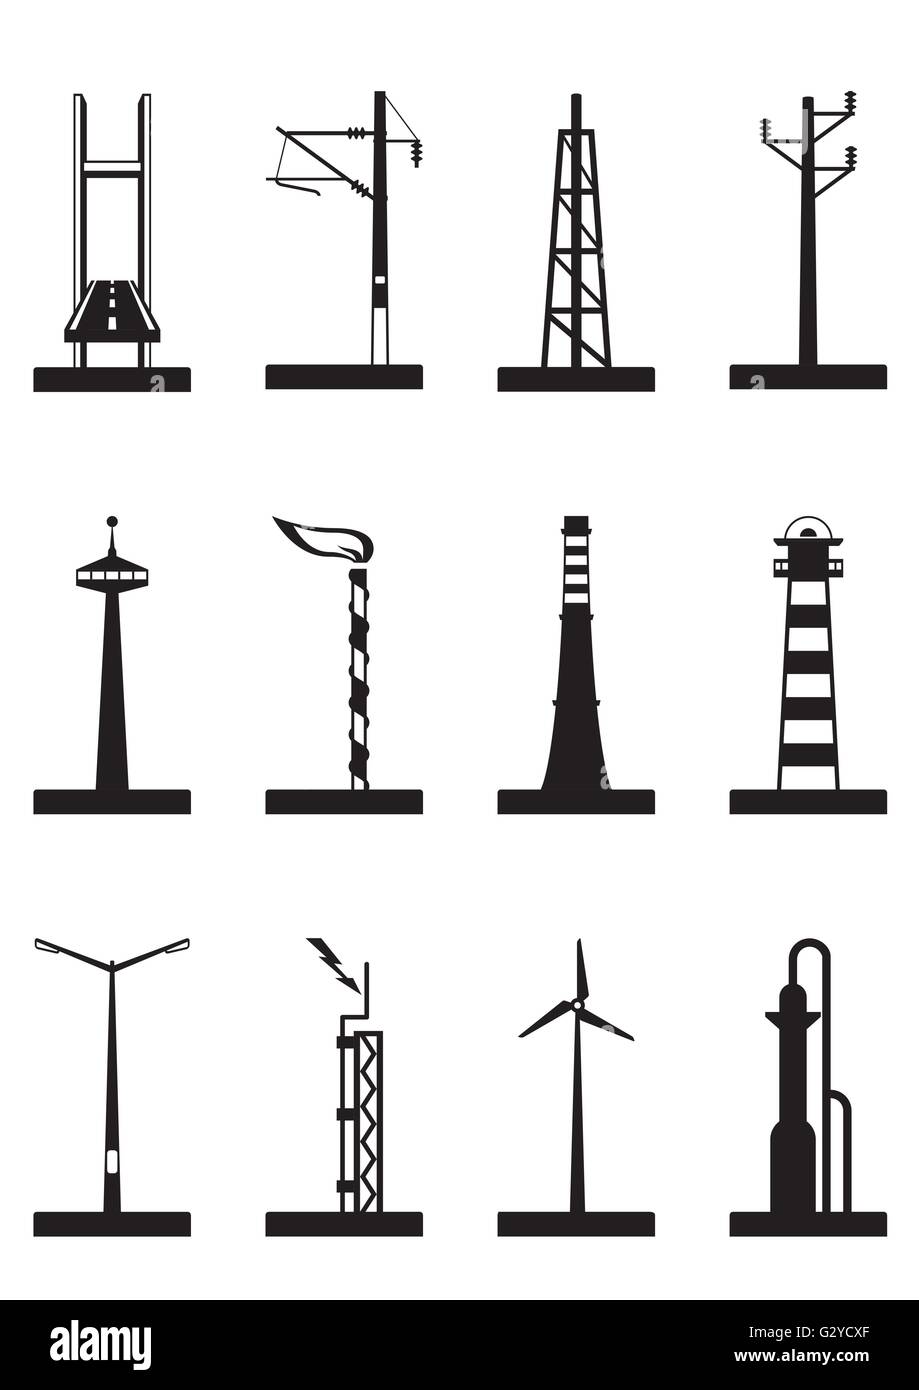 Industrial towers, poles and chimneys - vector illustration Stock Vector